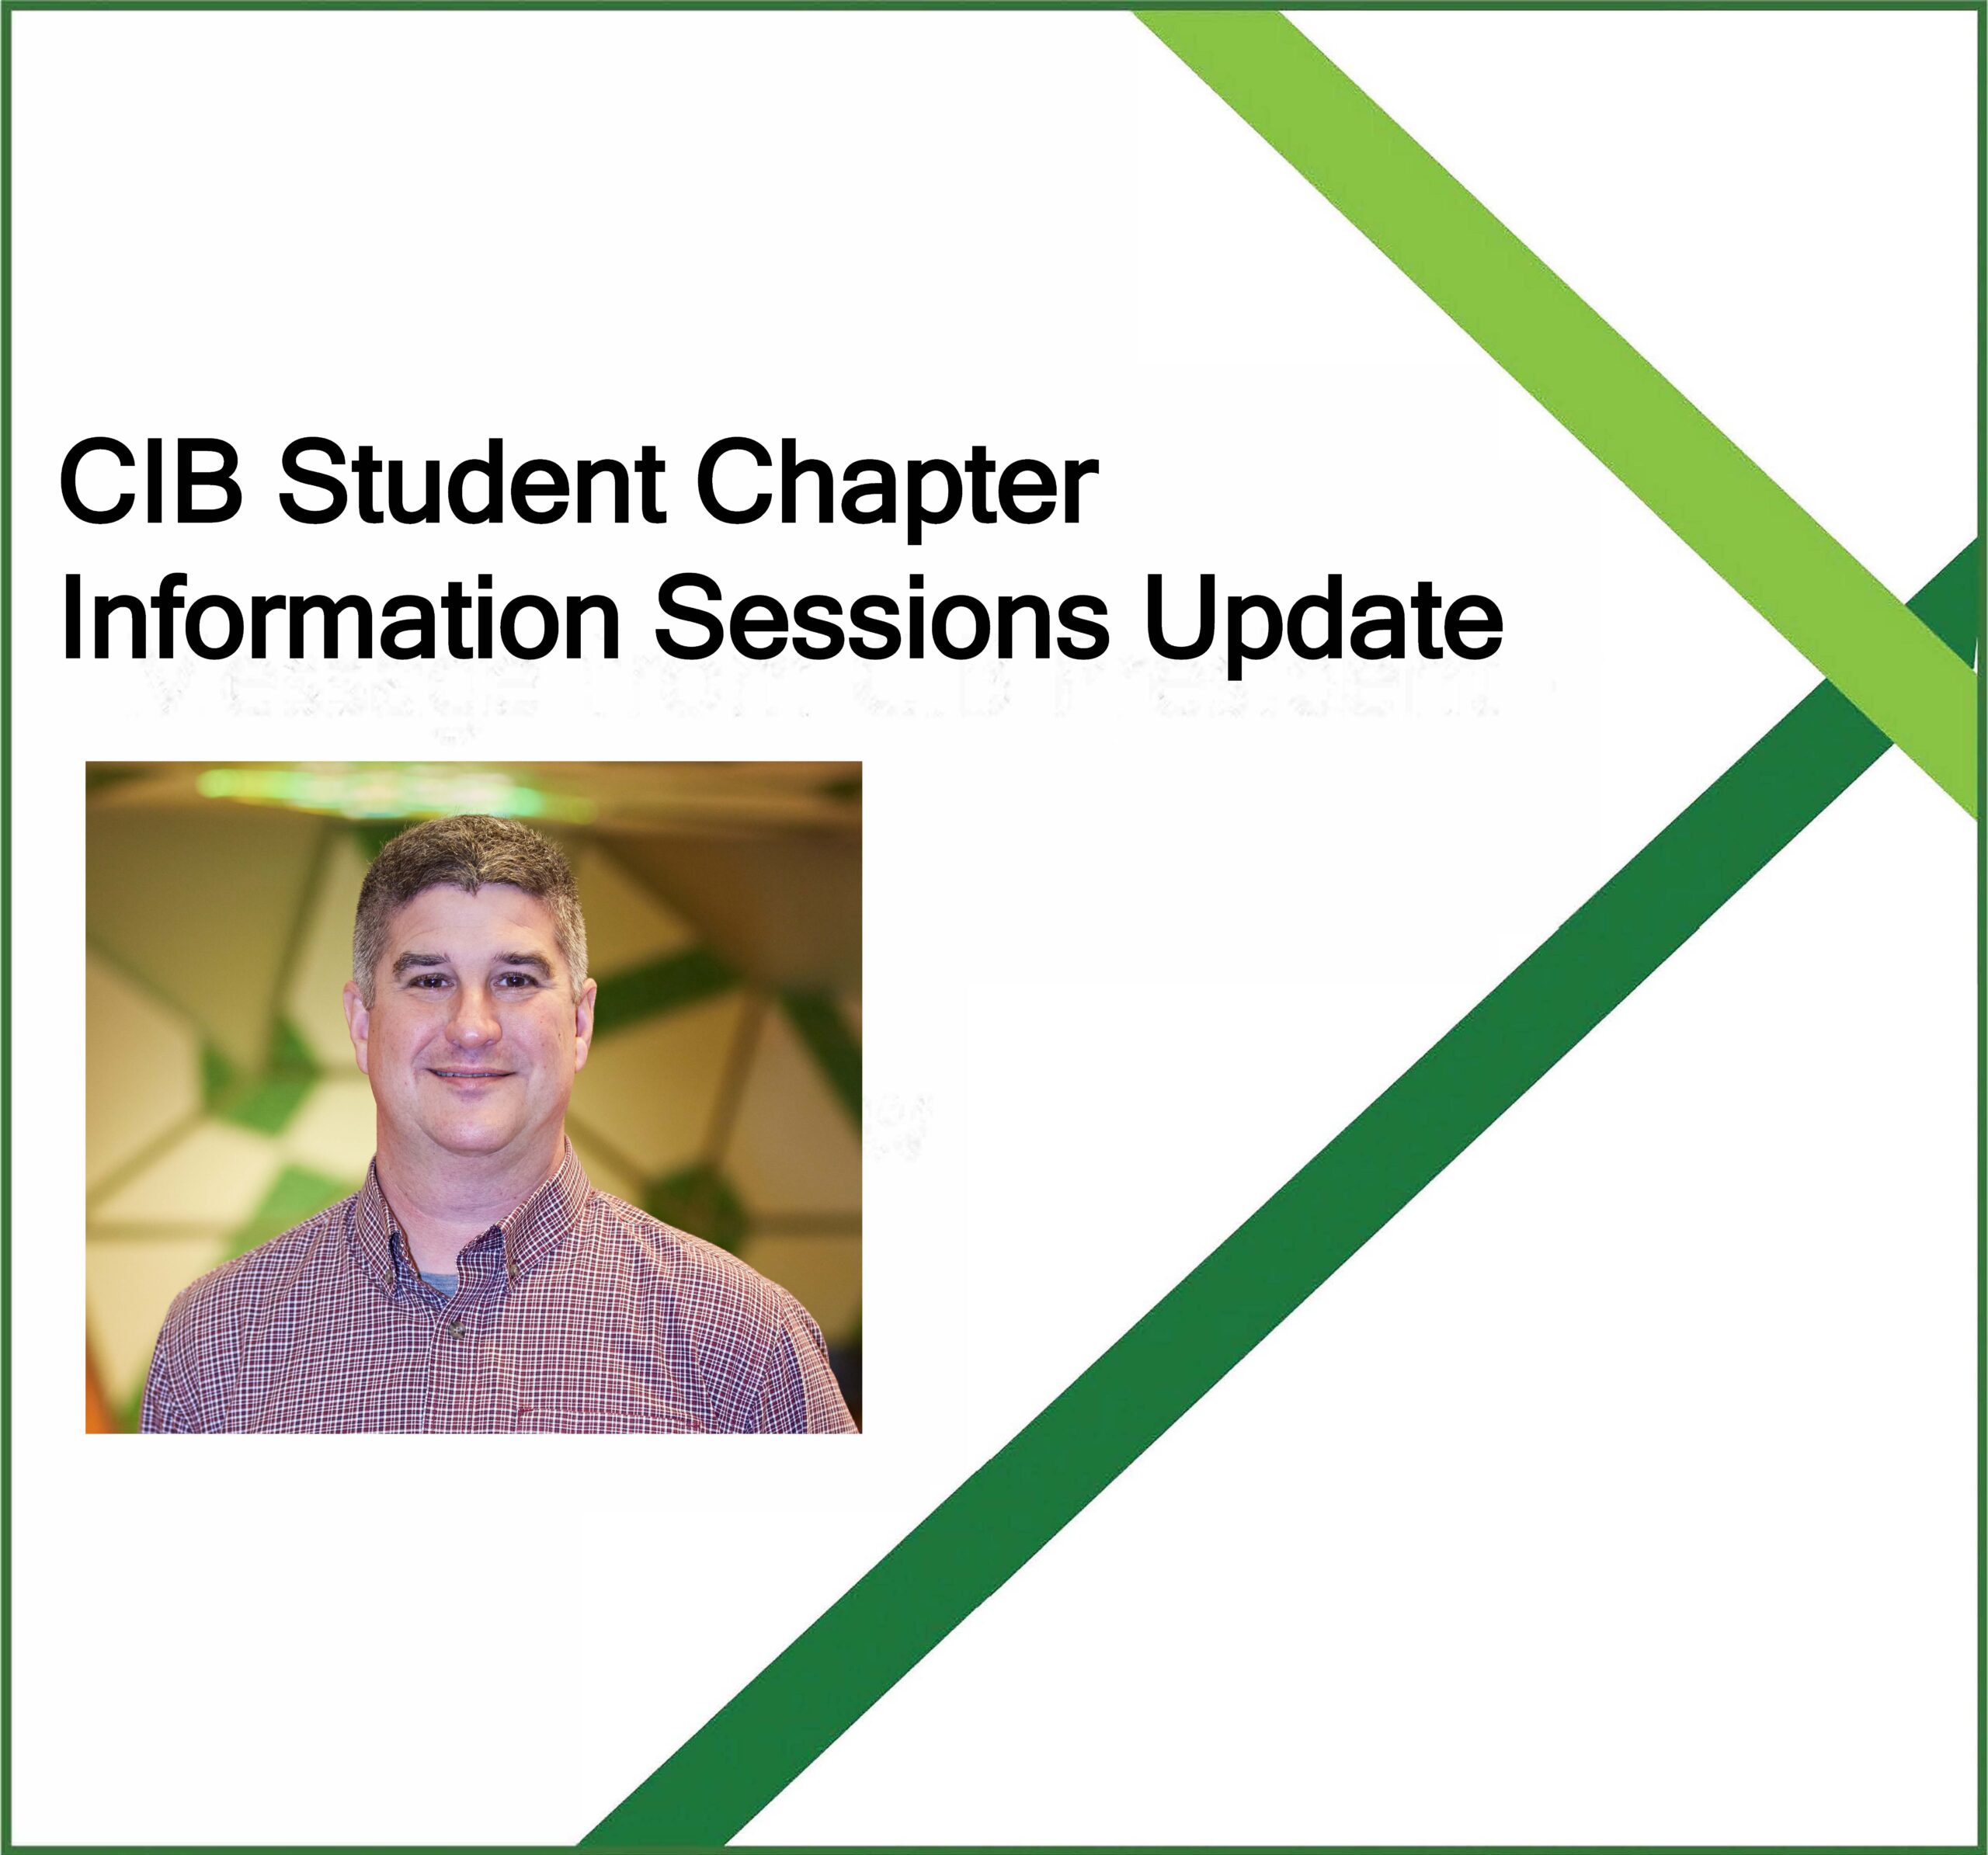 CIB Student Chapter Information Sessions 12 & 13 September Update